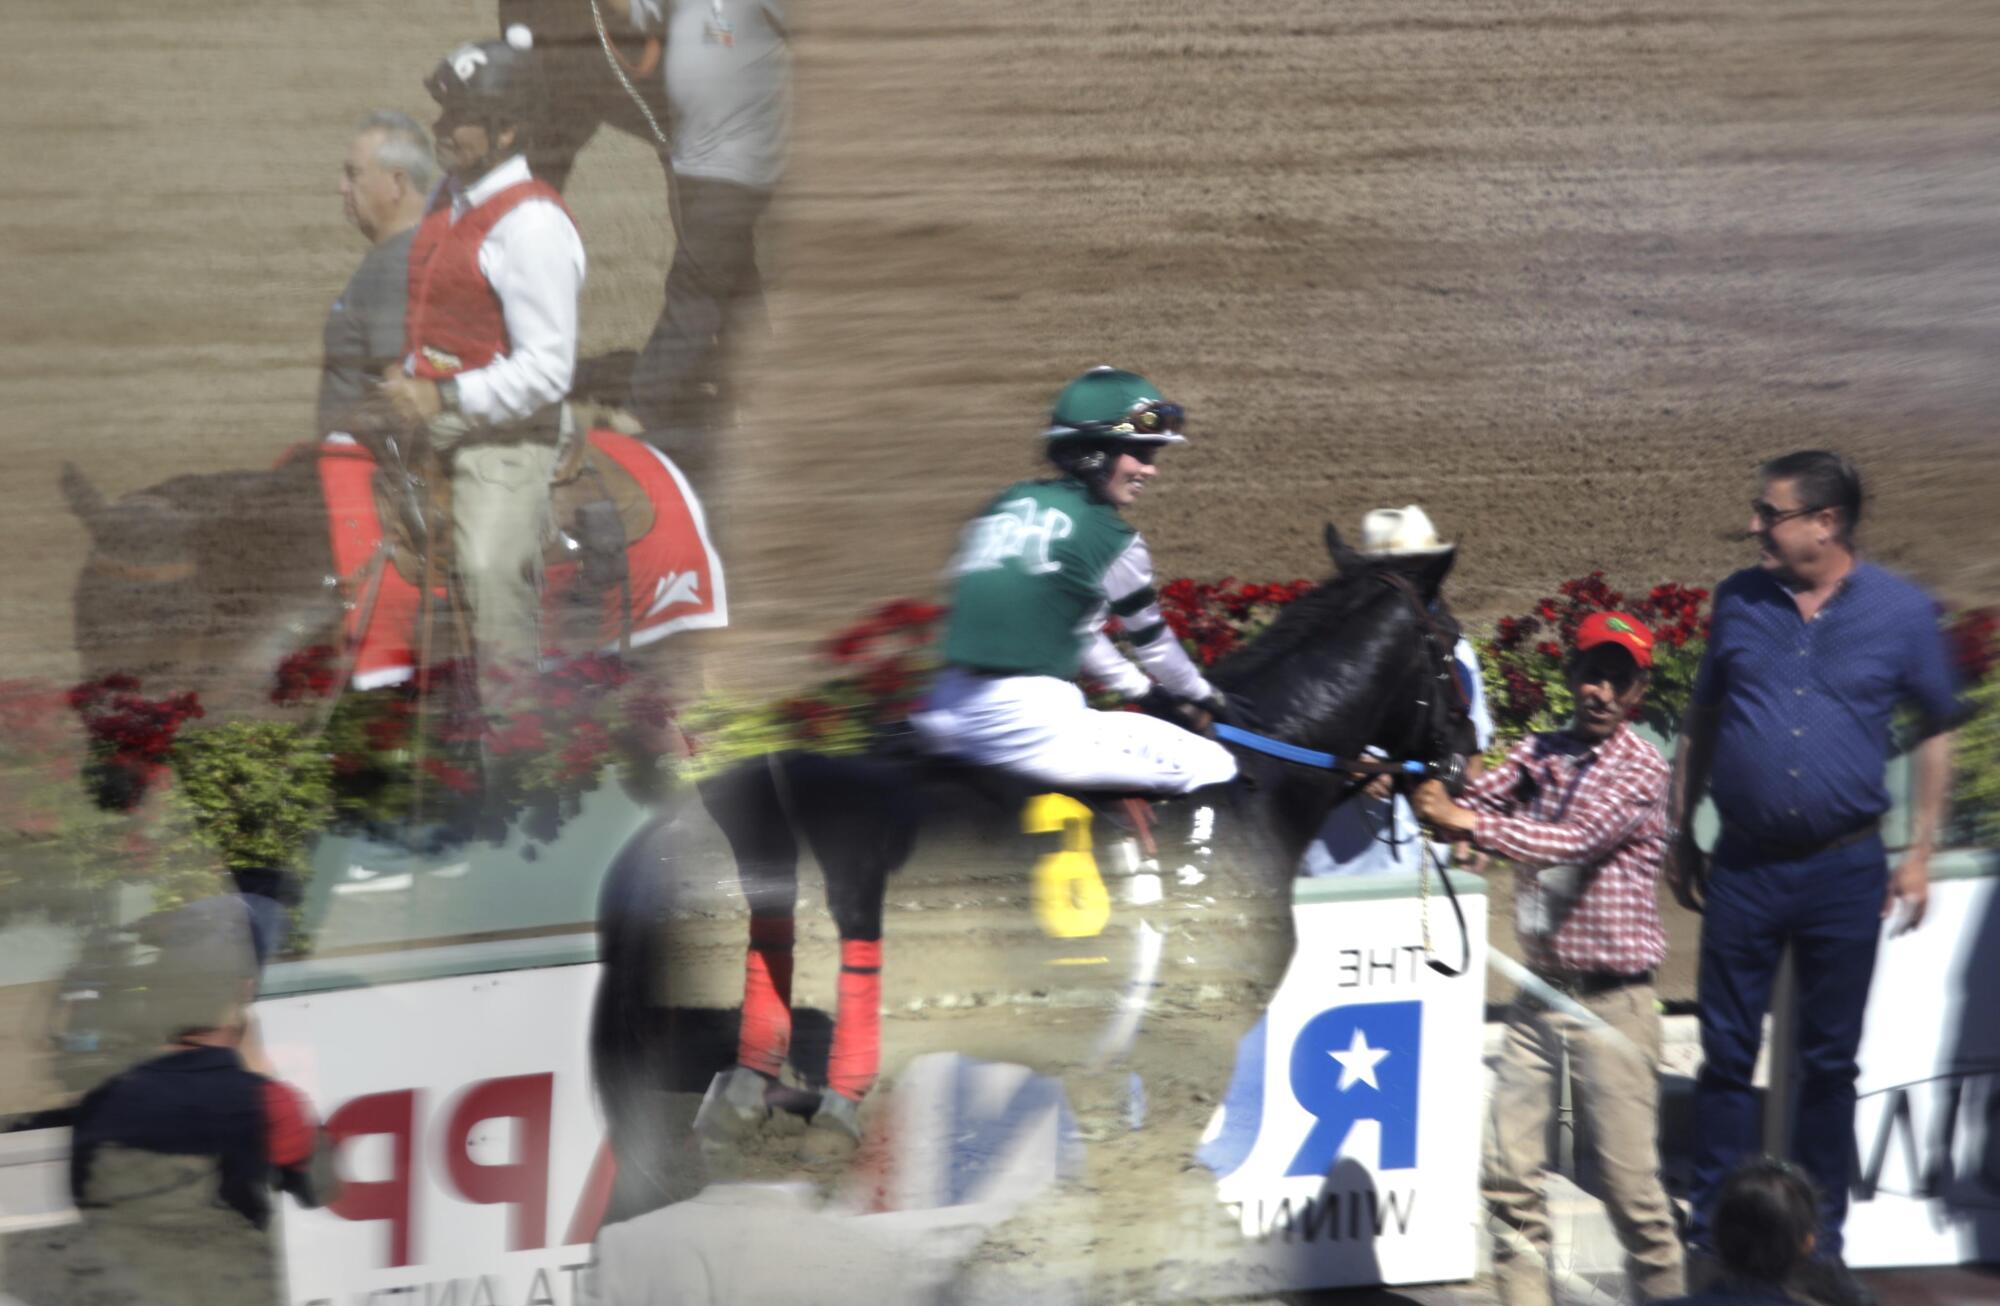  A reflection of a green-helmeted jockey on a horse 